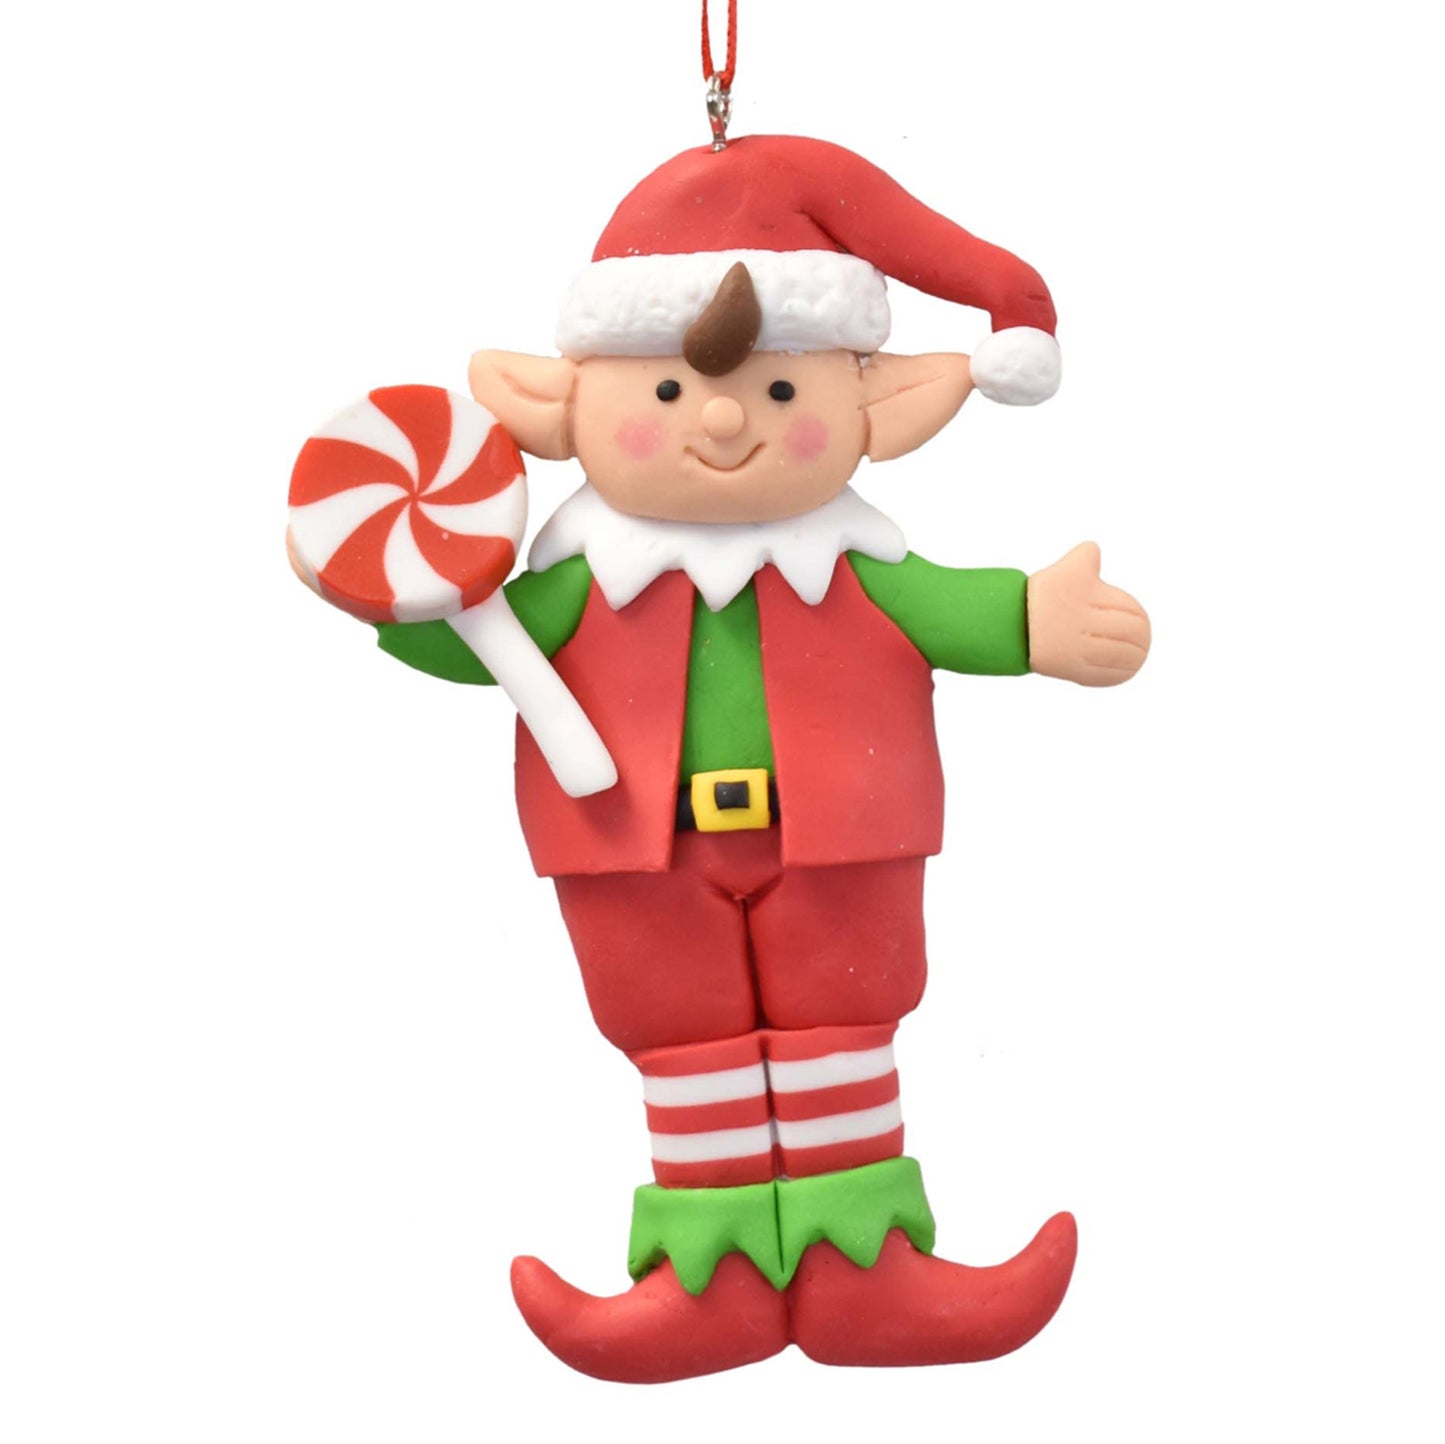 Candy Cane Girl and Boy Elf 4.25" in Red Green White | YKC22